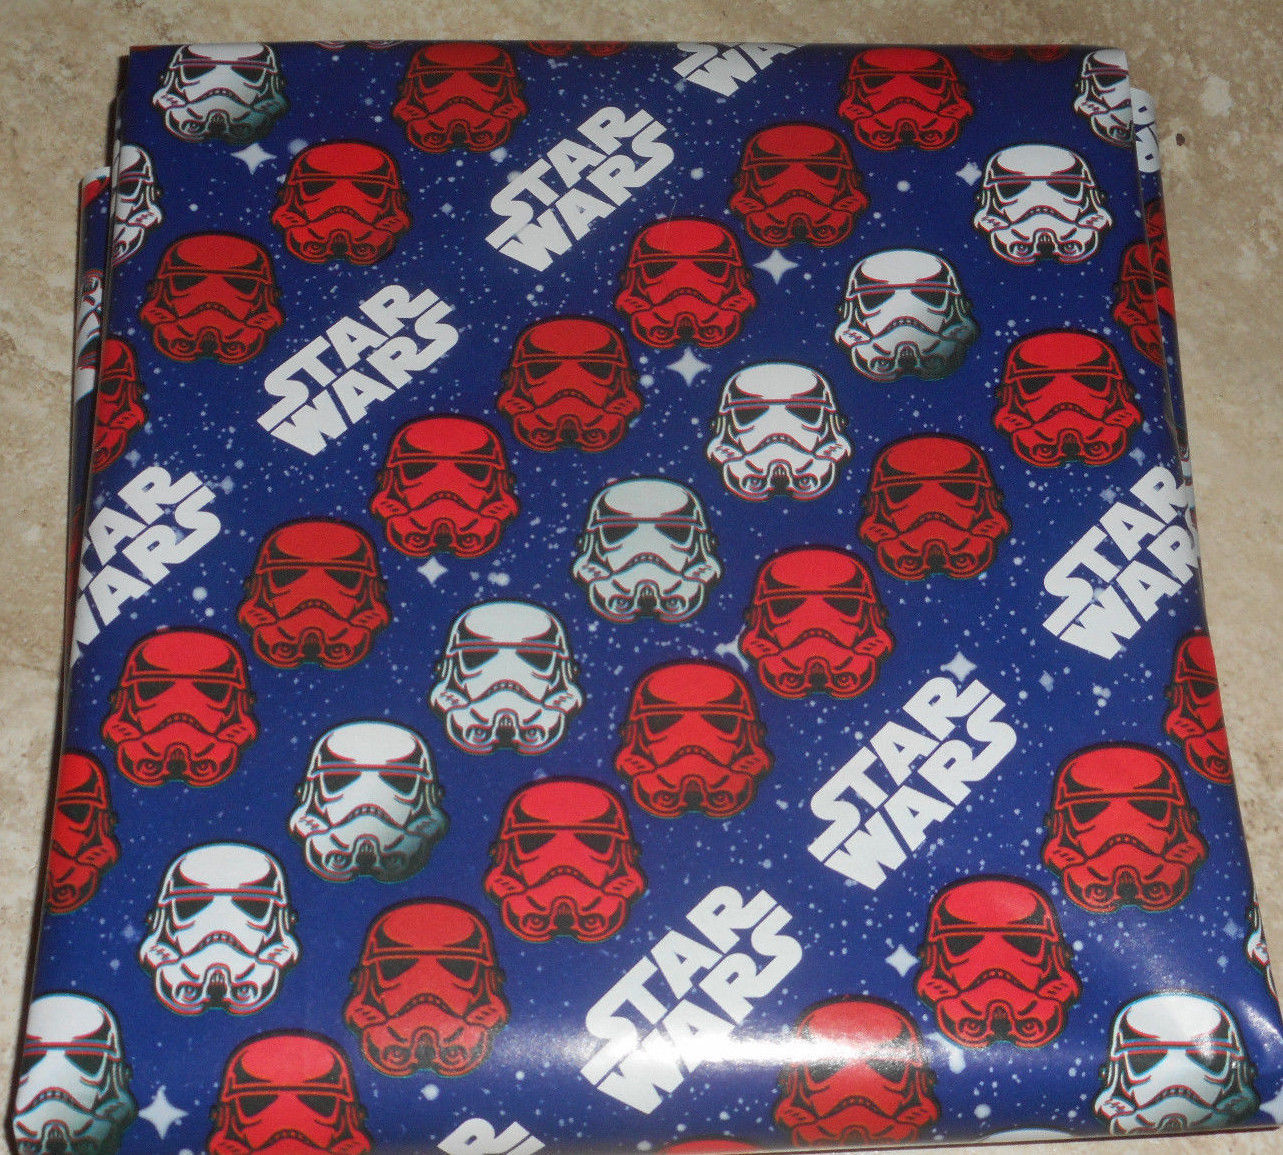 Usa Star Wars Movie Christmas Wrapping Paper and 24 similar items